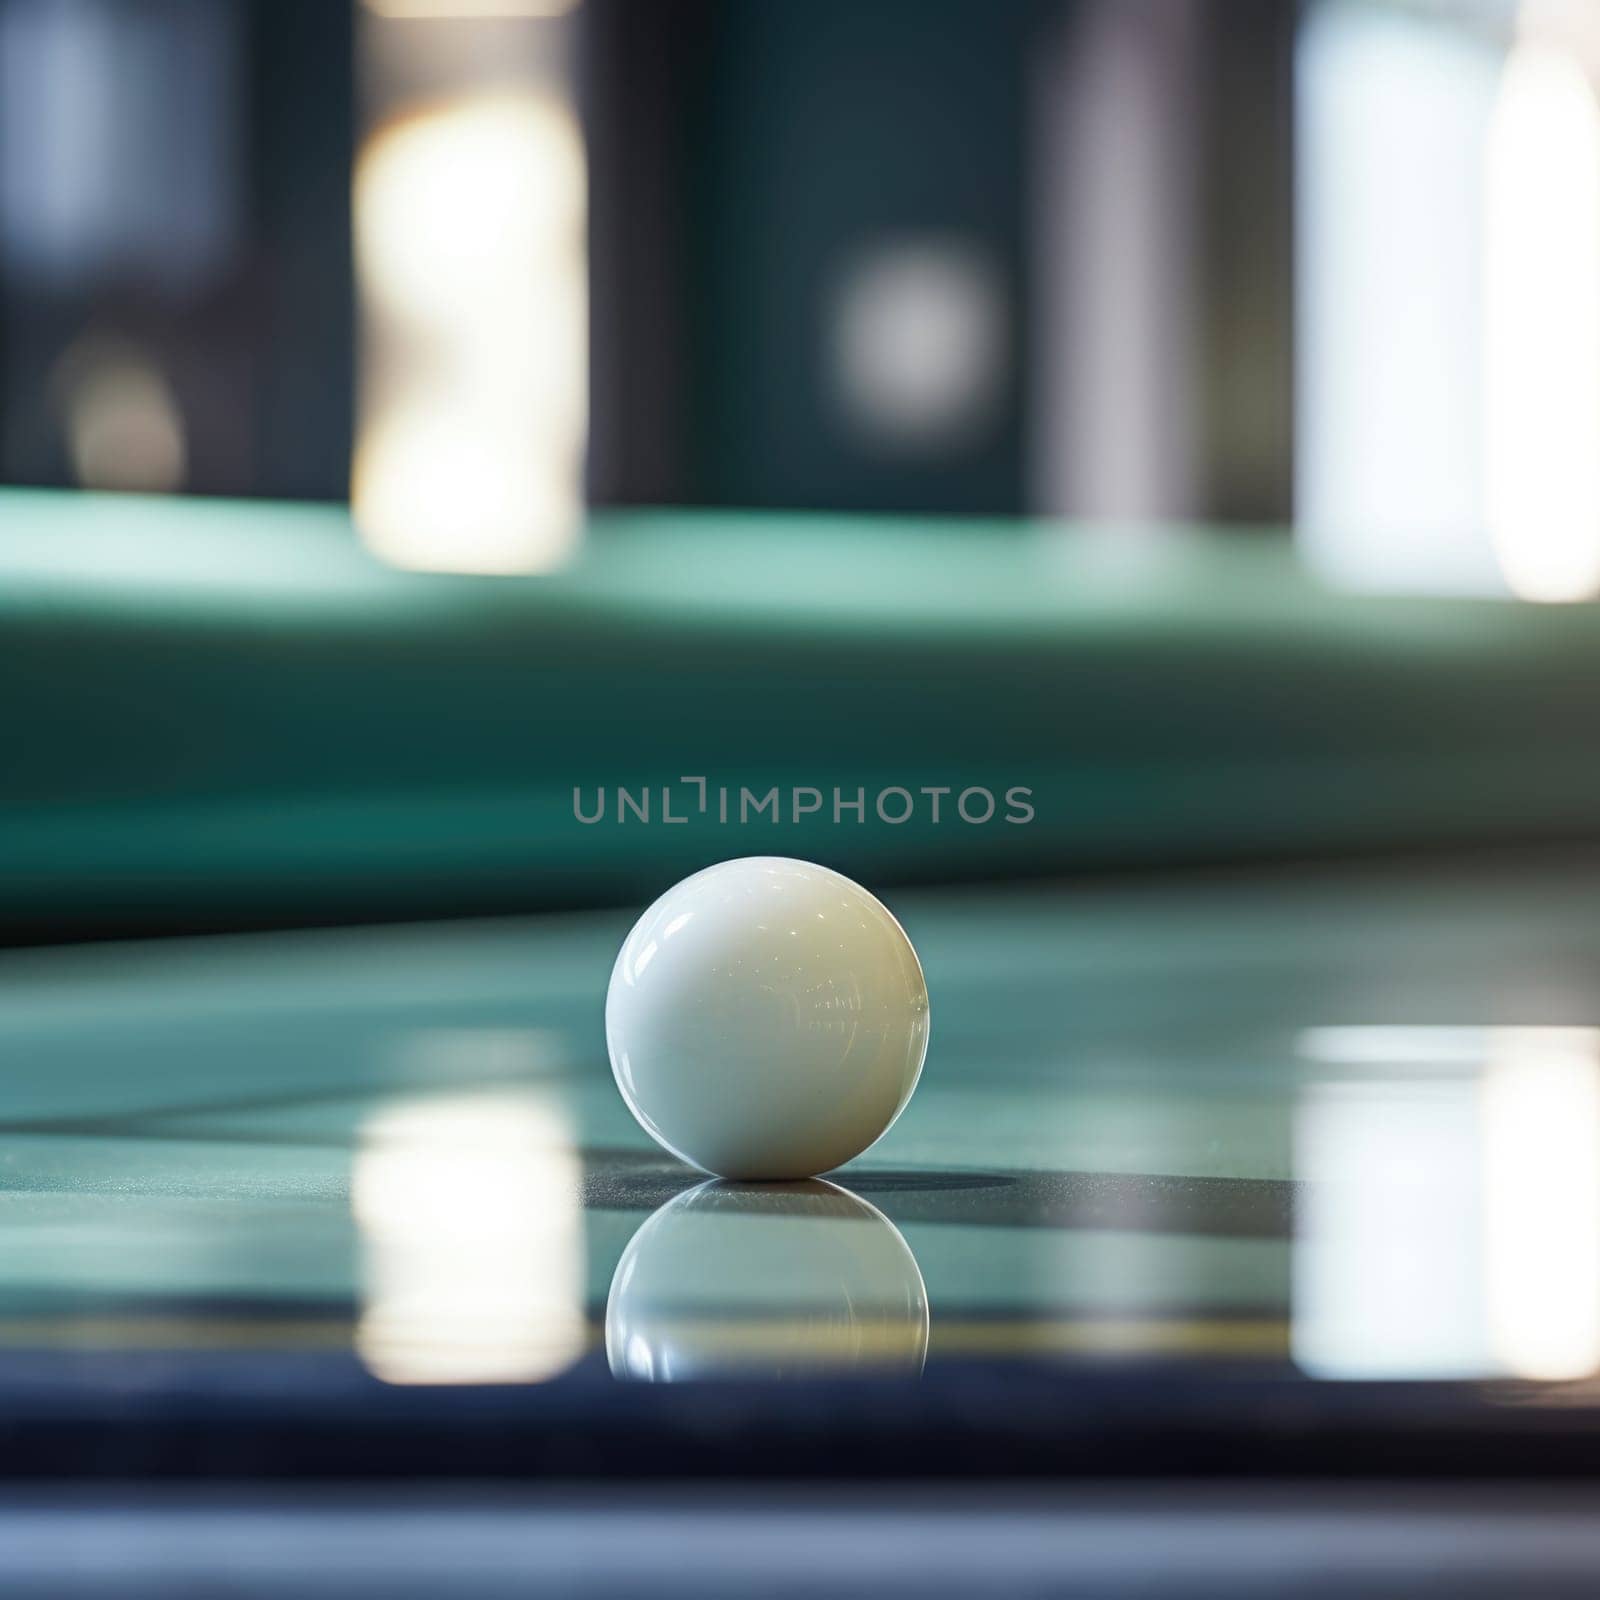 A white ball sitting on a pool table, AI by starush